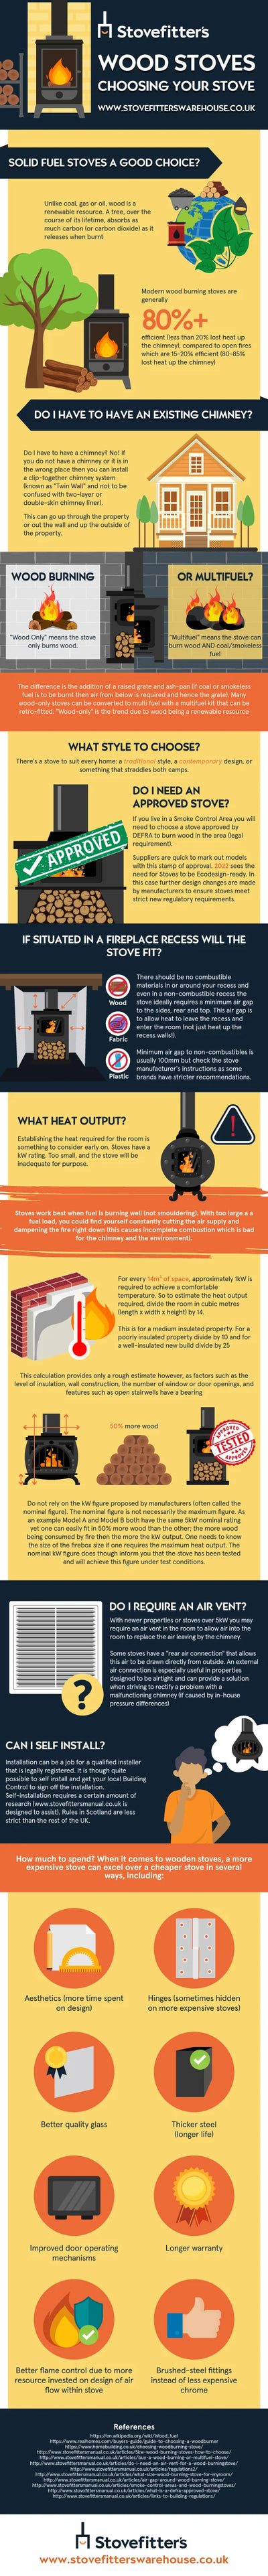 Infographic on how to choose a wood burning stove for your property